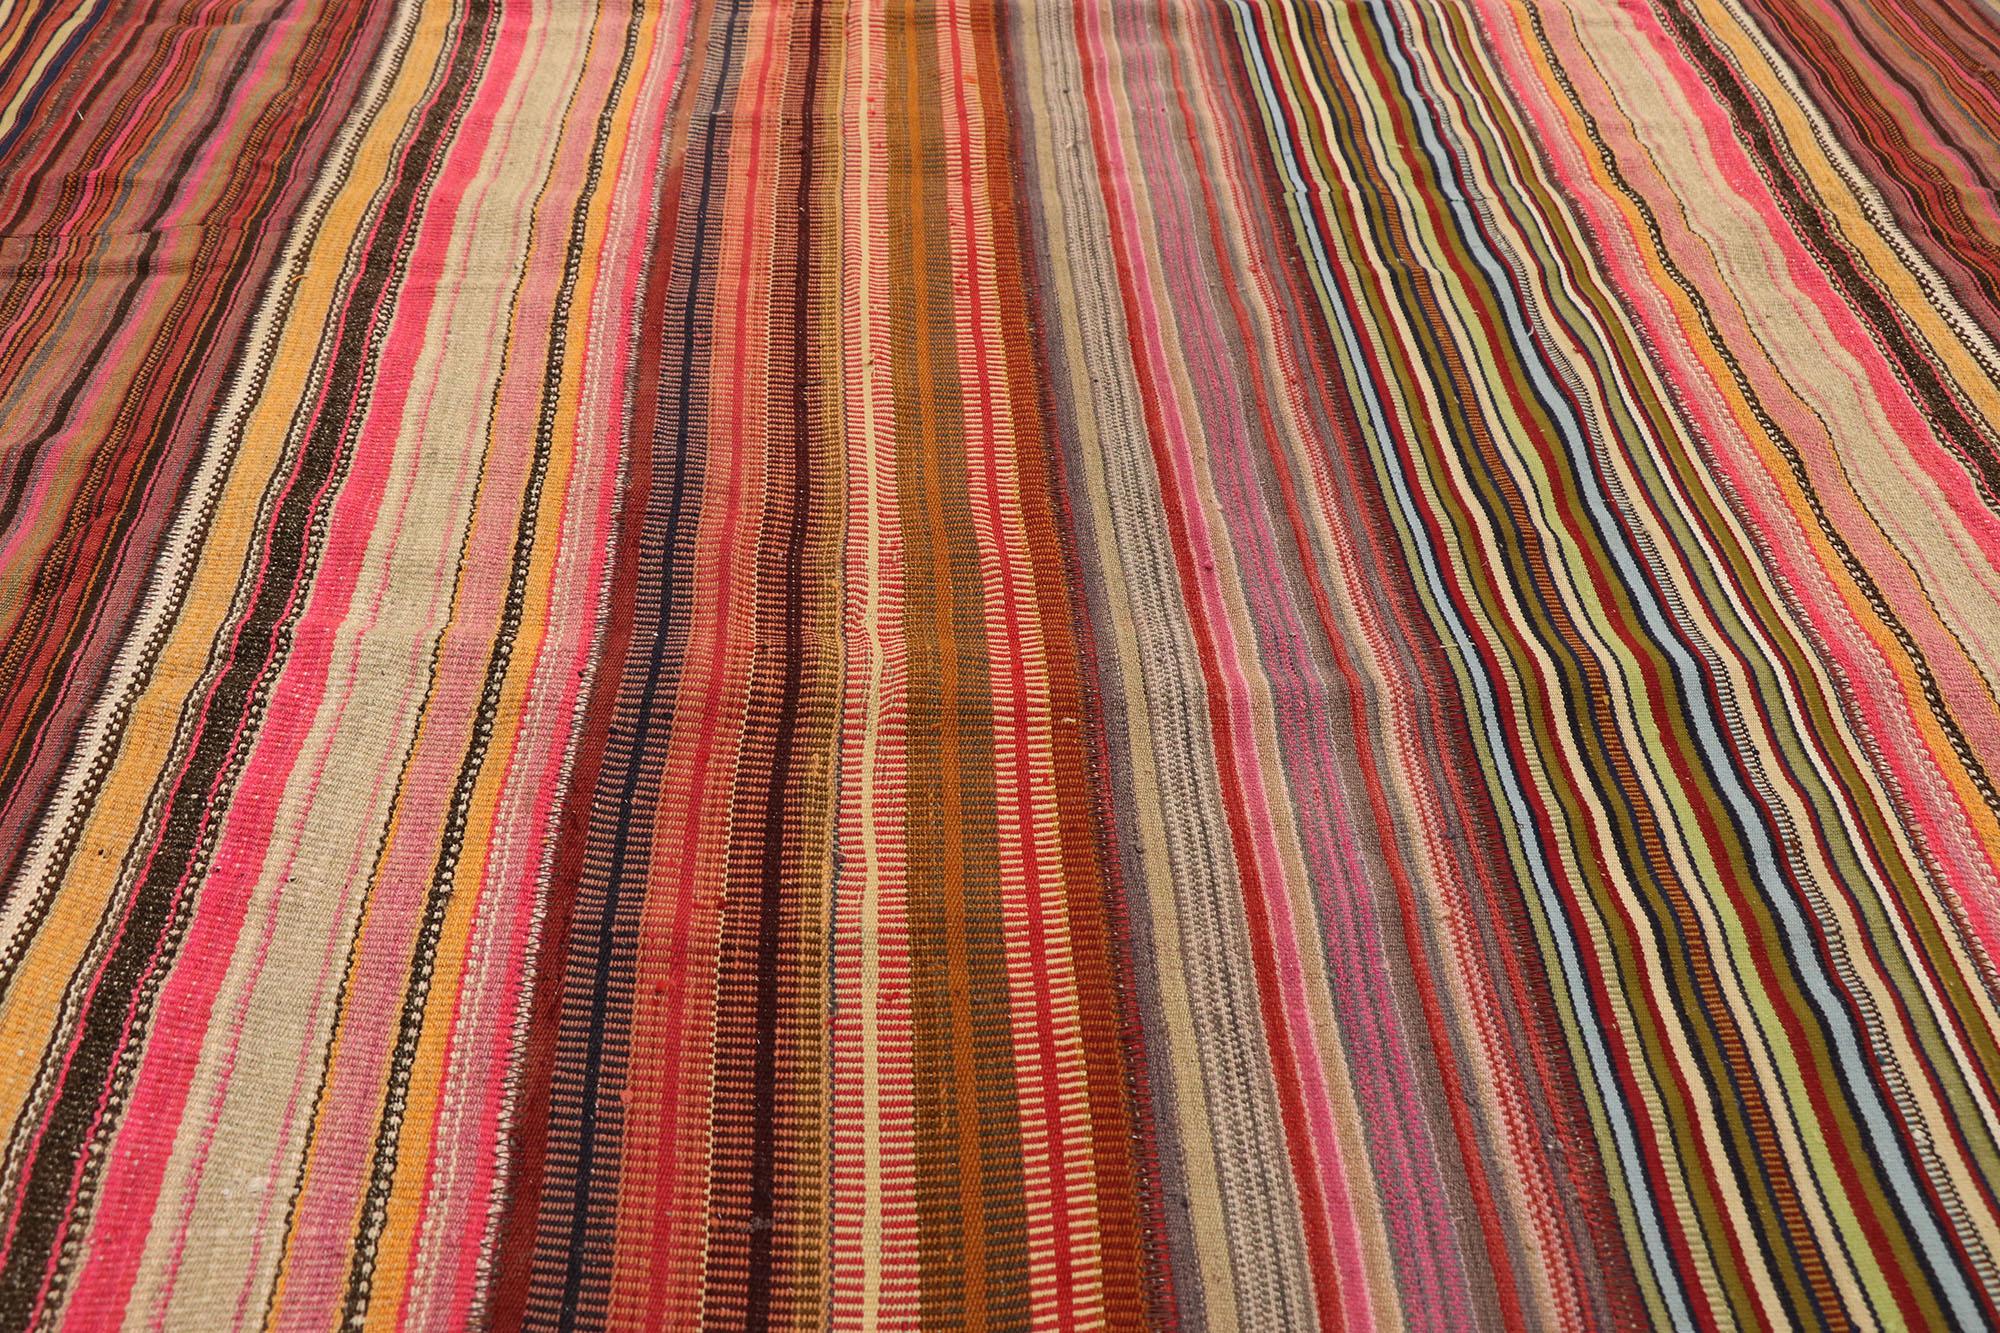 Vintage Turkish Striped Kilim Rug with Modern Rustic Cabin Style For Sale 1